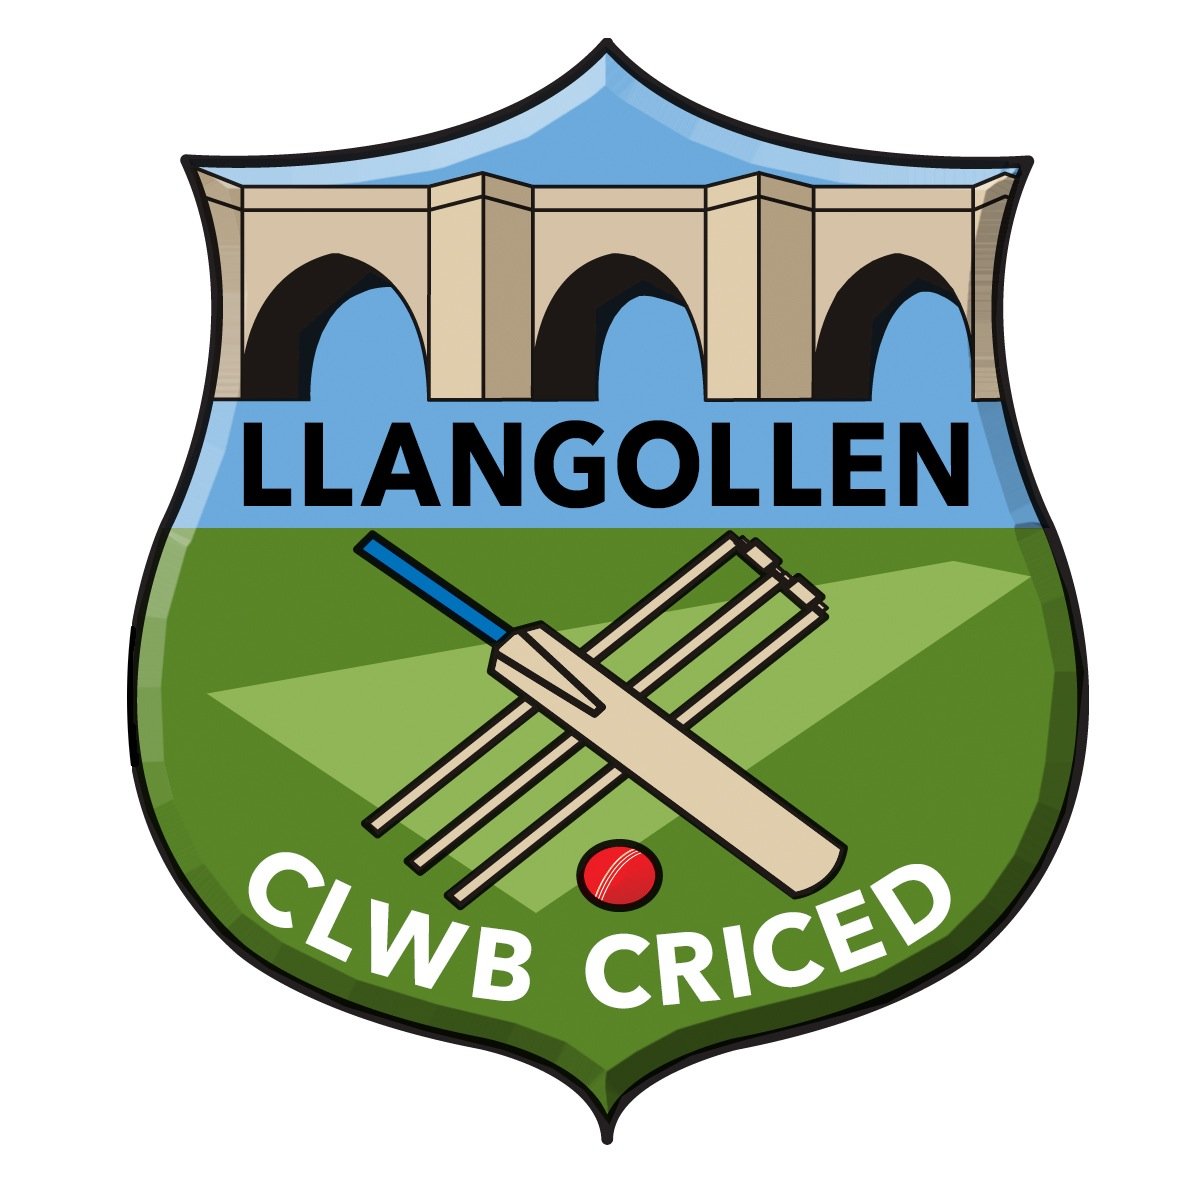 Llangollen Cricket Club play in the North Wales Cricket League. We are always on the lookout for new players of all ages and abilities.